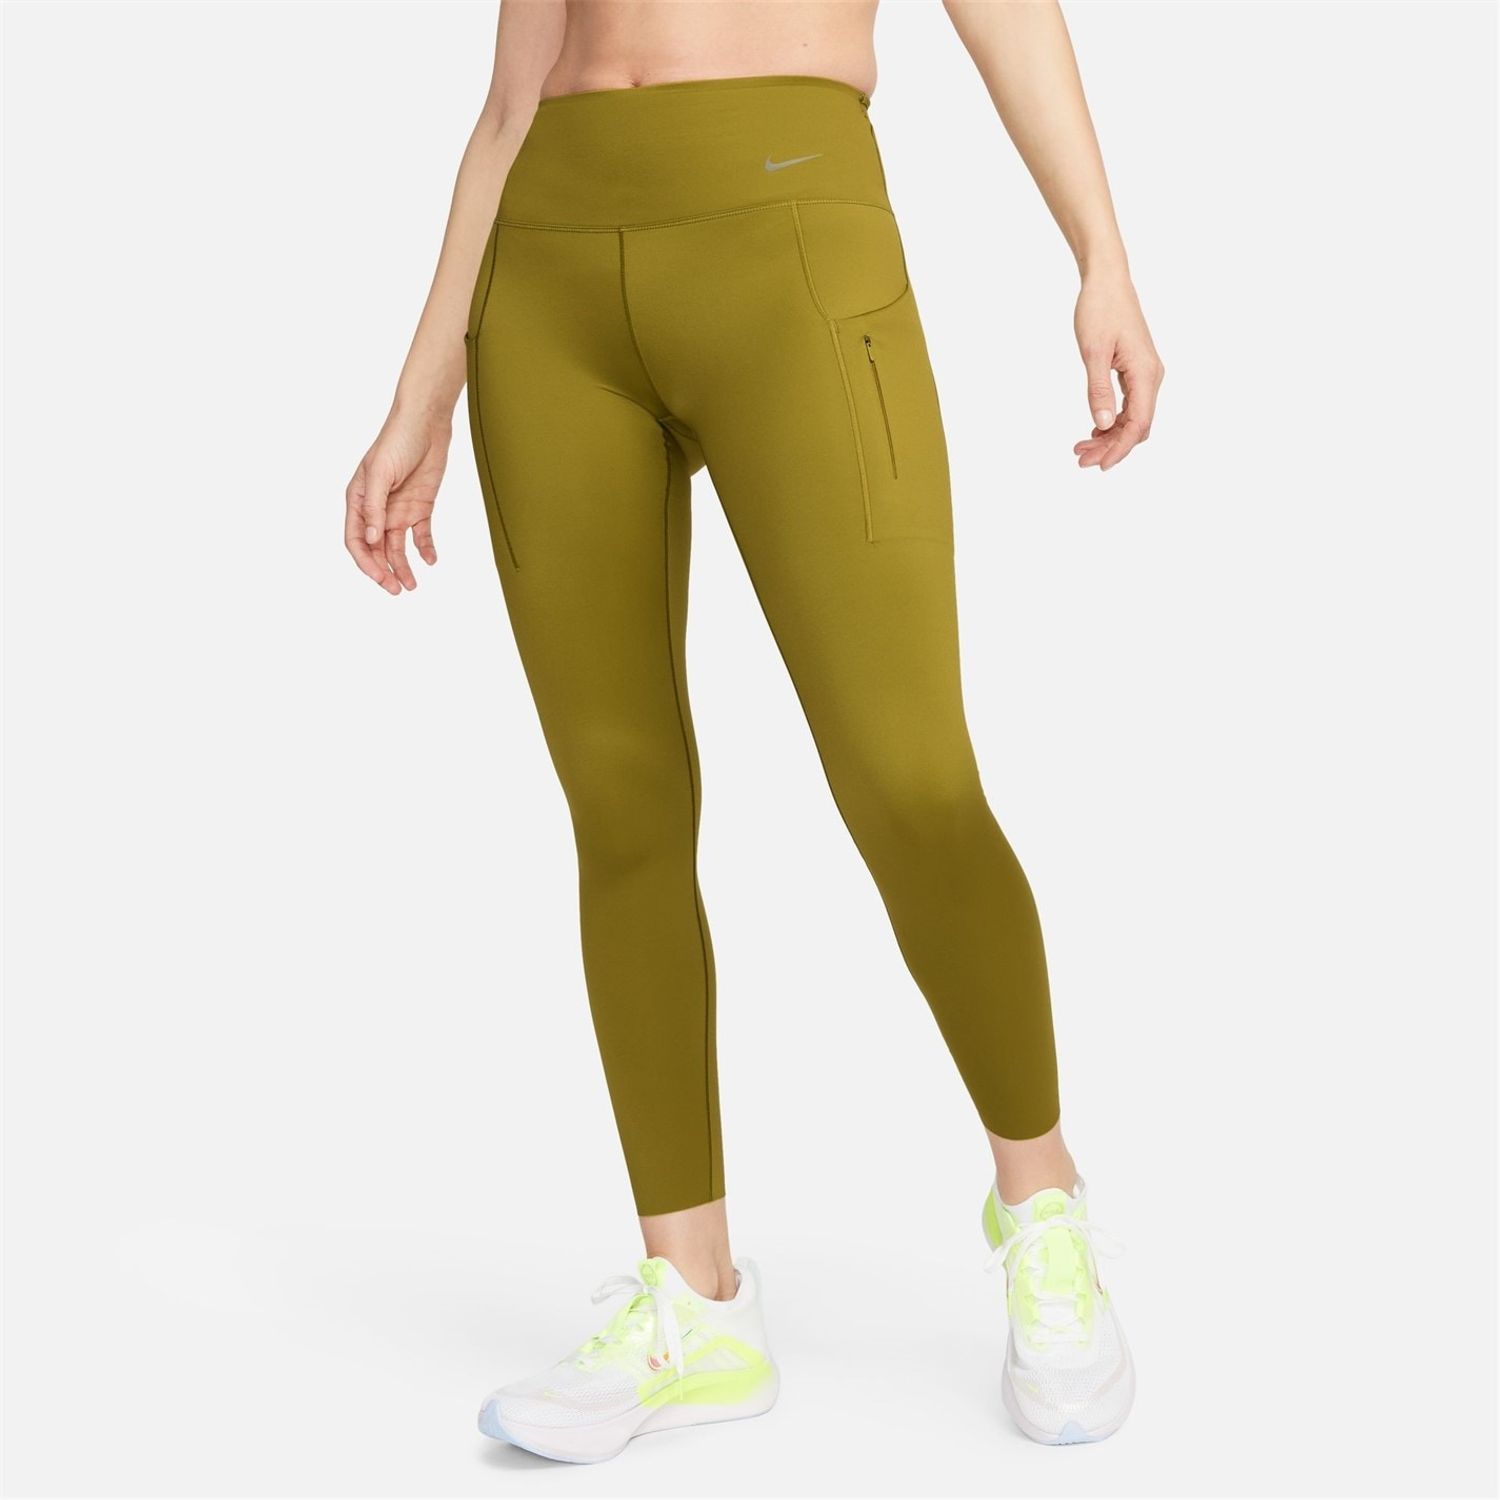 https://gtl-uk.prod.myauroraassets.com/p/341767/womens-dri-fit-go-firm-support-mid-rise-7-8-leggings-with-pockets-fr2358085nike-womens-dri-fit-go-firm-support-mid-rise-7-8-leggings-with-pockets-fr2358085.jpg?t=rp&w=1500&h=1500